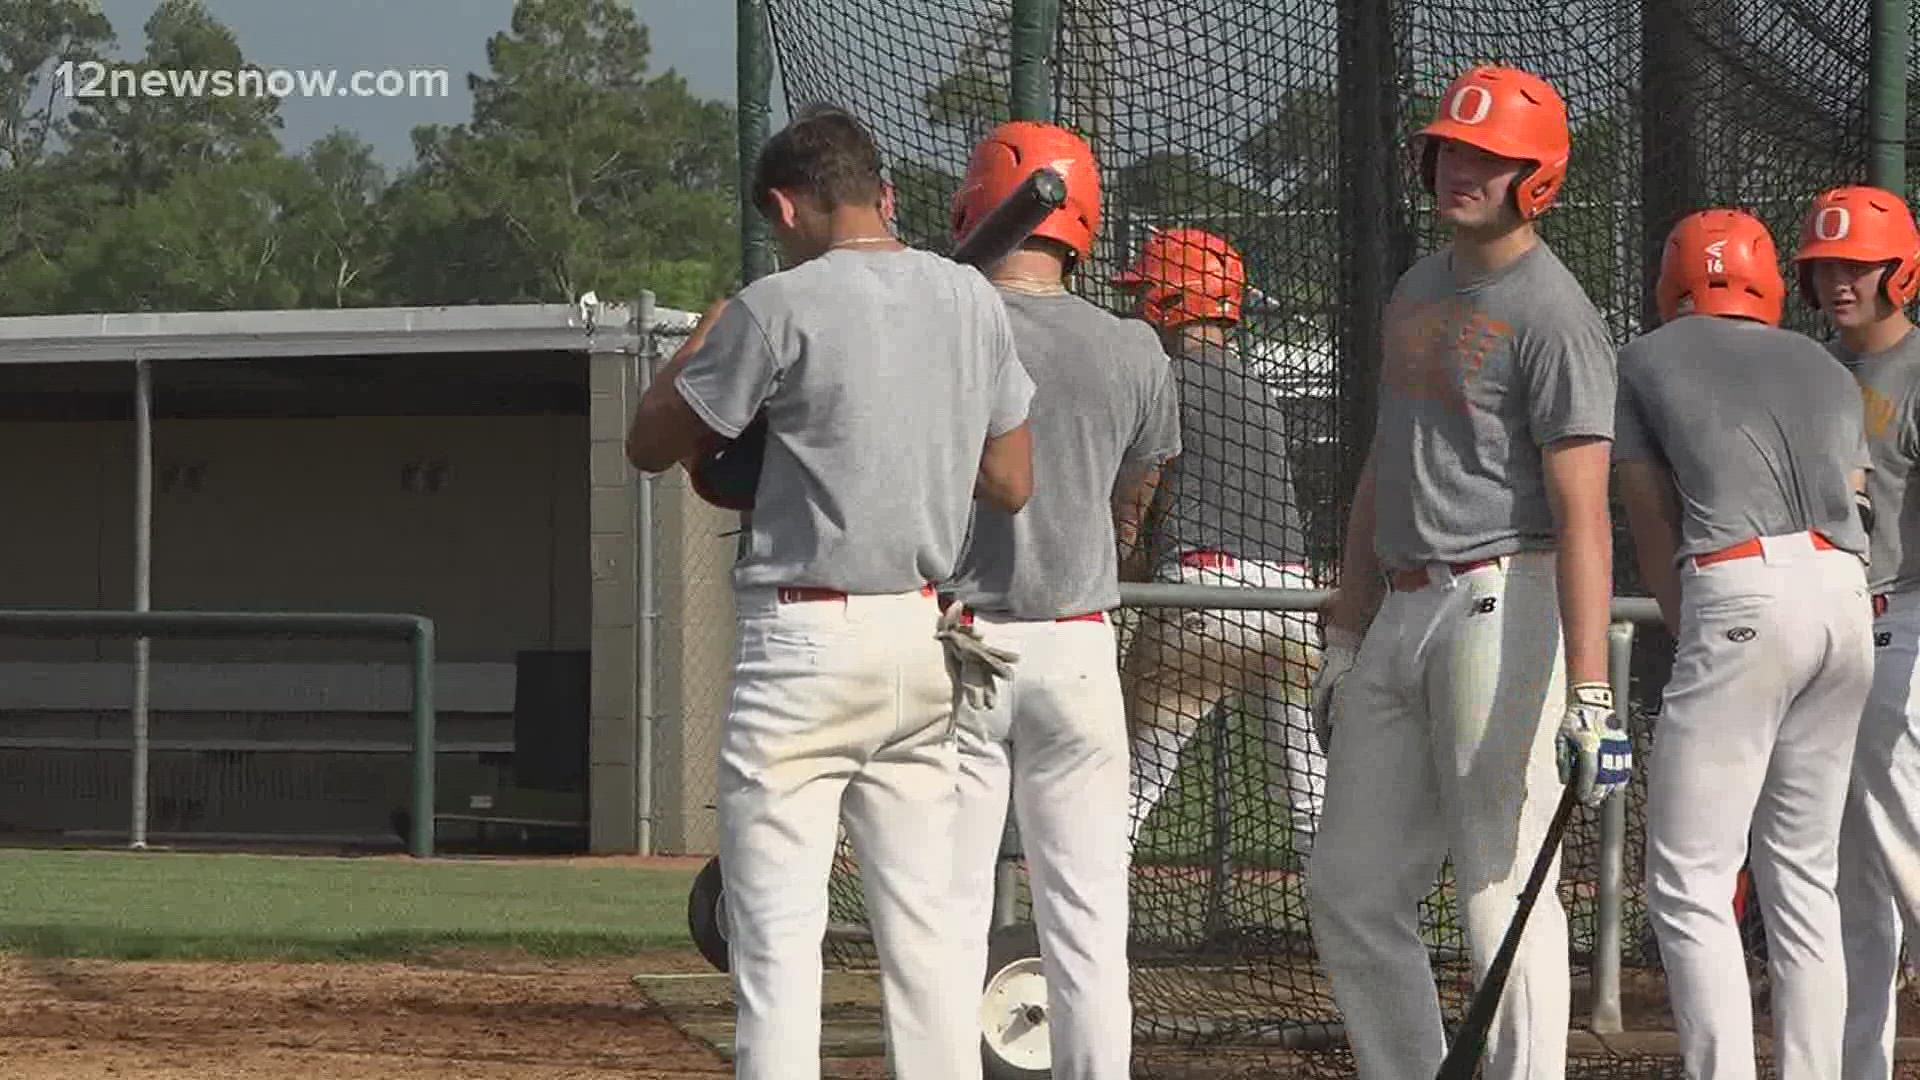 Orangefield will continue their playoff run Wednesday in Navasota against China Spring